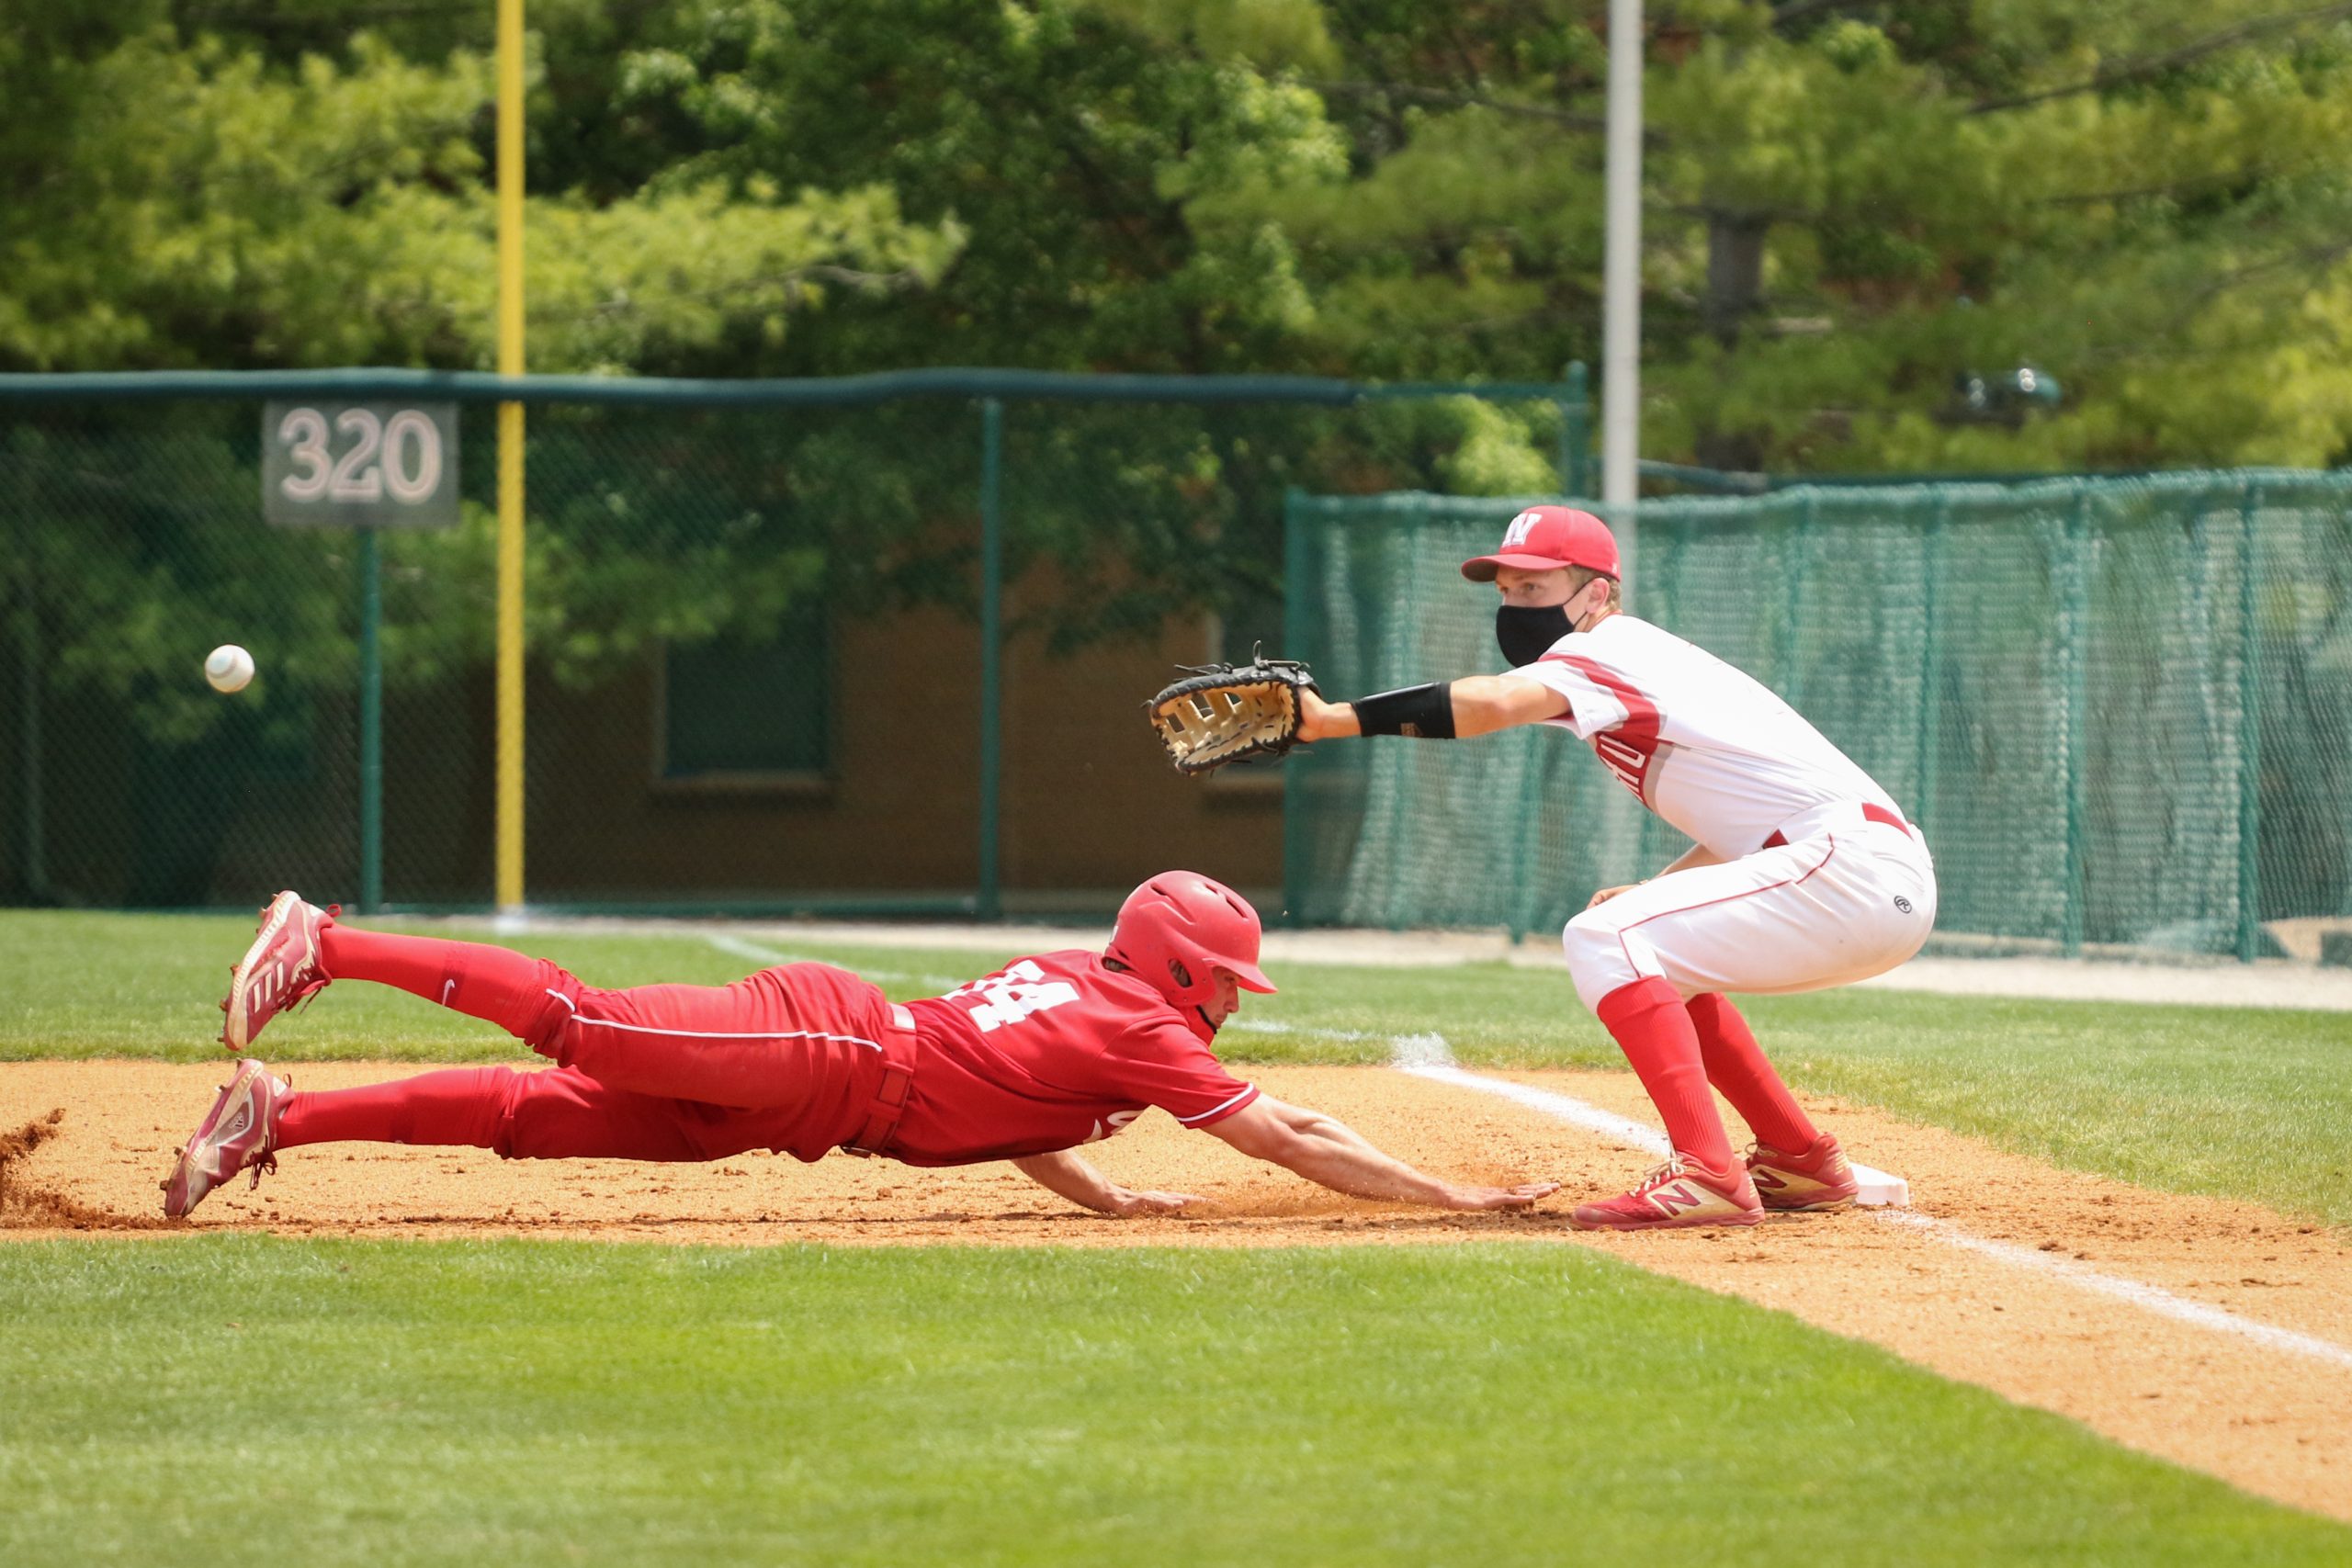 A player in a white uniform with his right foot on first base extends his left arm to catch a baseball as a player in a bright red uniform dives headfirst into the bag.